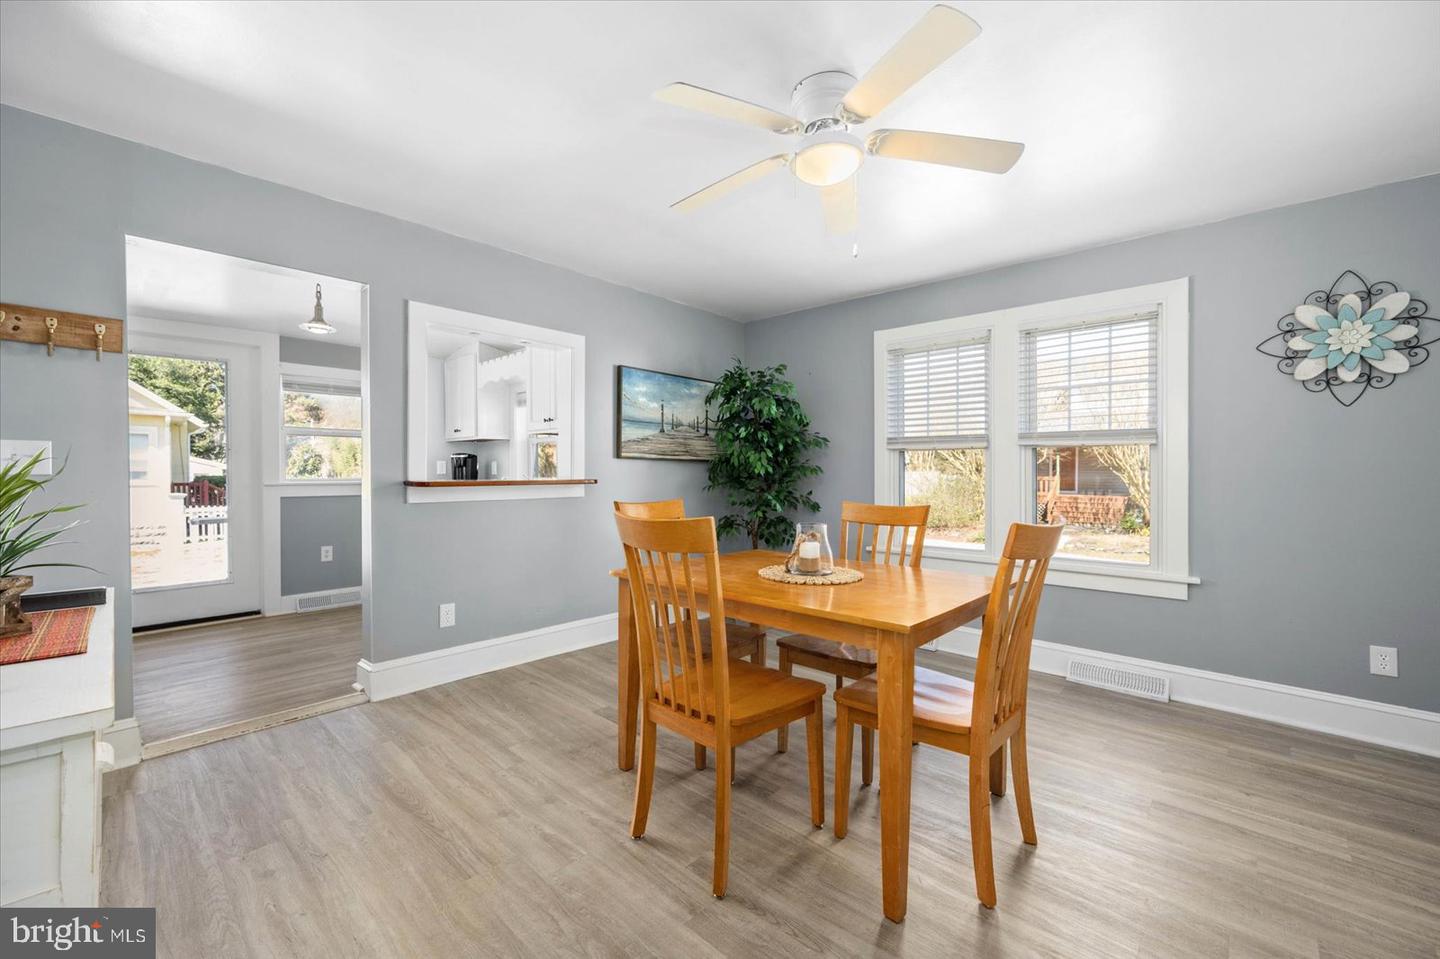 MDWO2019446-802902743334-2024-03-07-00-08-06 9801 / 9805 Golf Course Rd | Ocean City, MD Real Estate For Sale | MLS# Mdwo2019446  - 1st Choice Properties